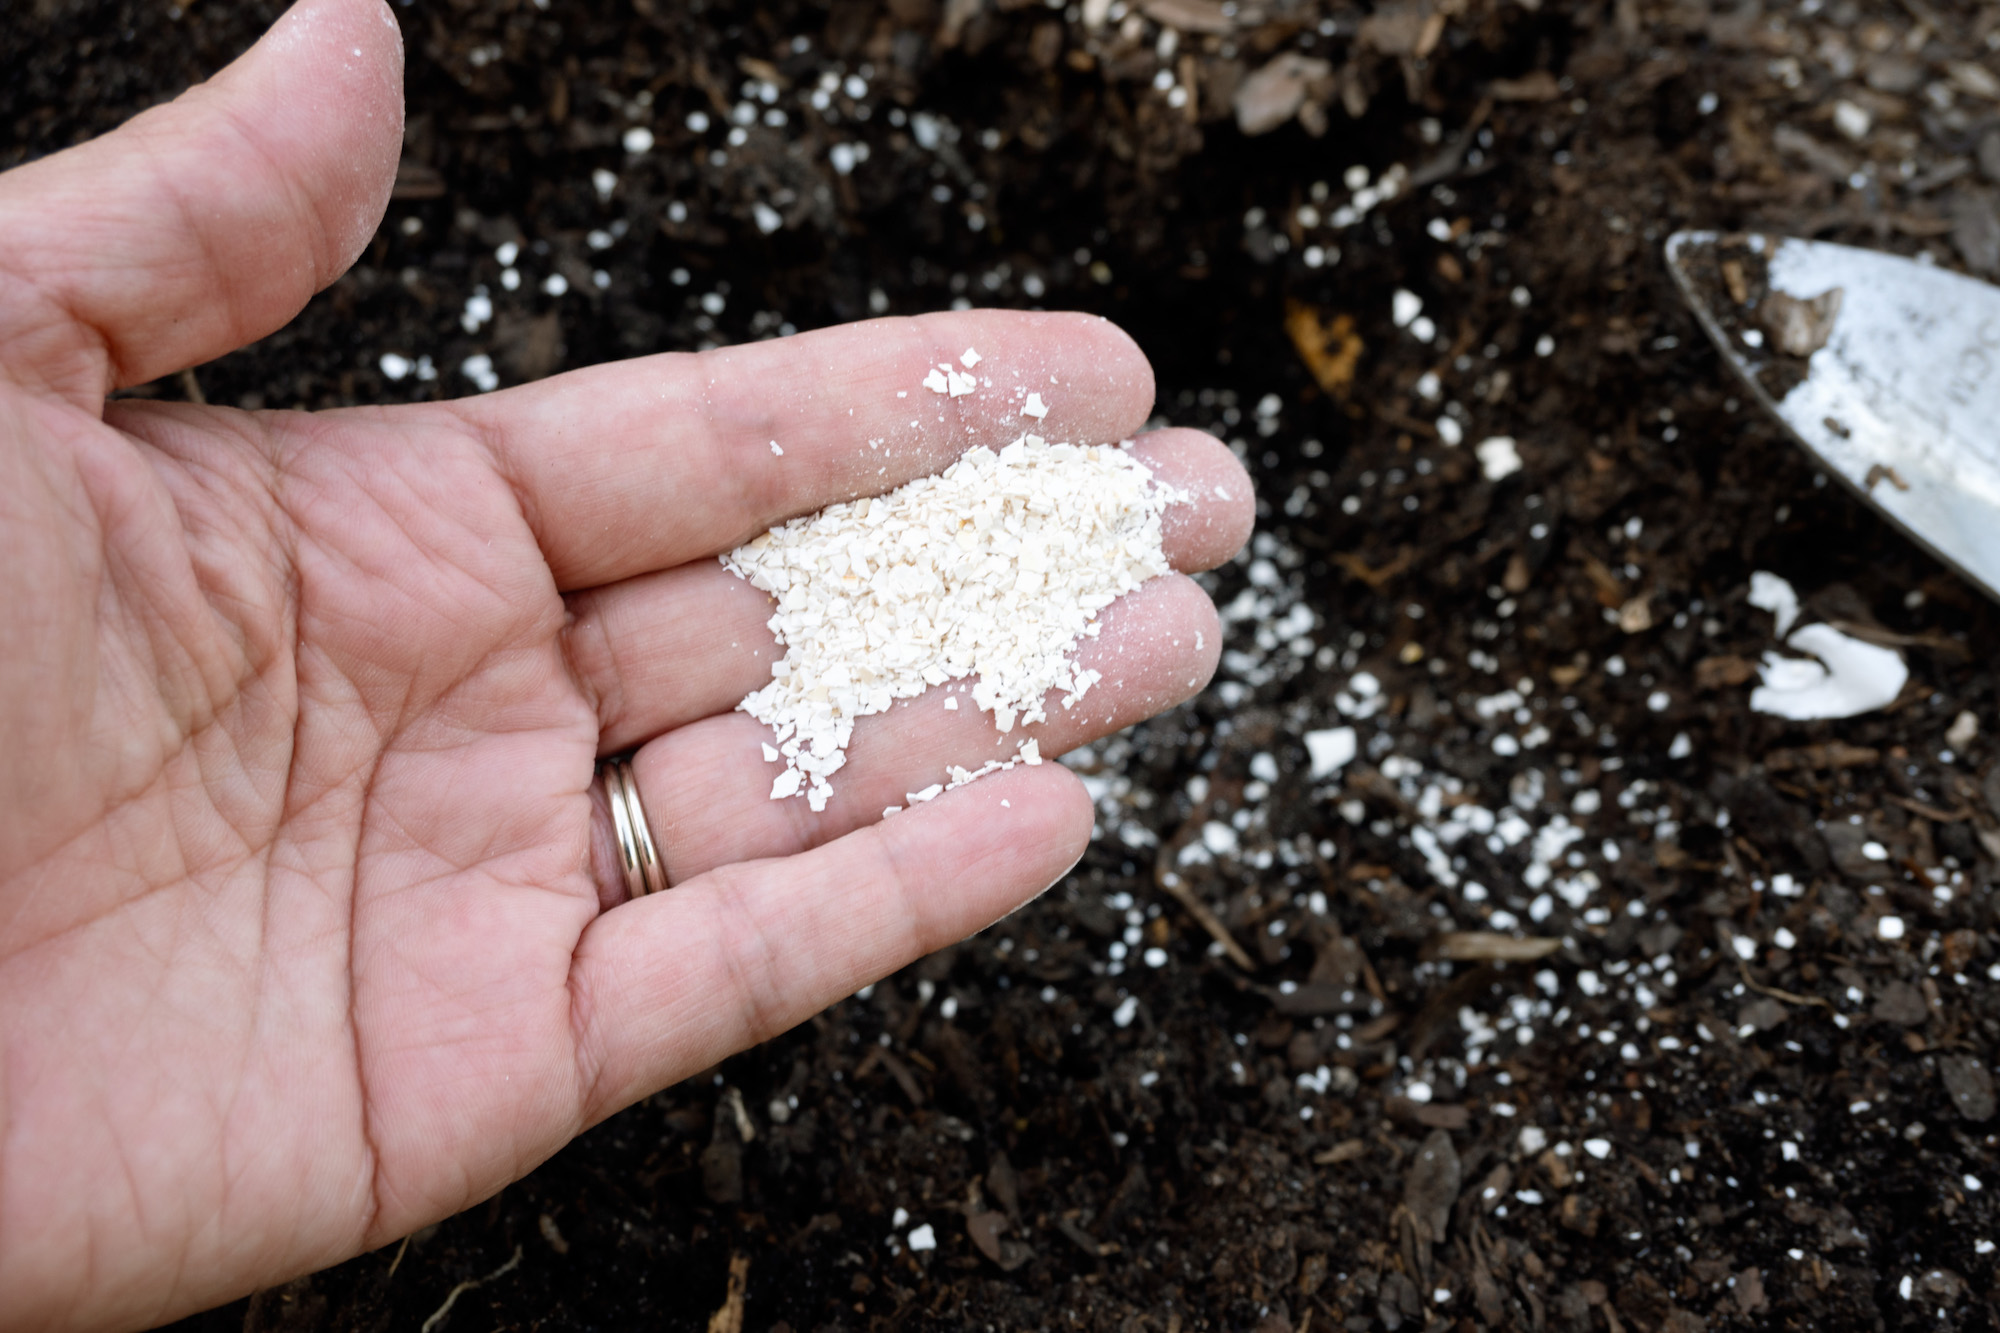 ground up eggshells in a hand over dirt